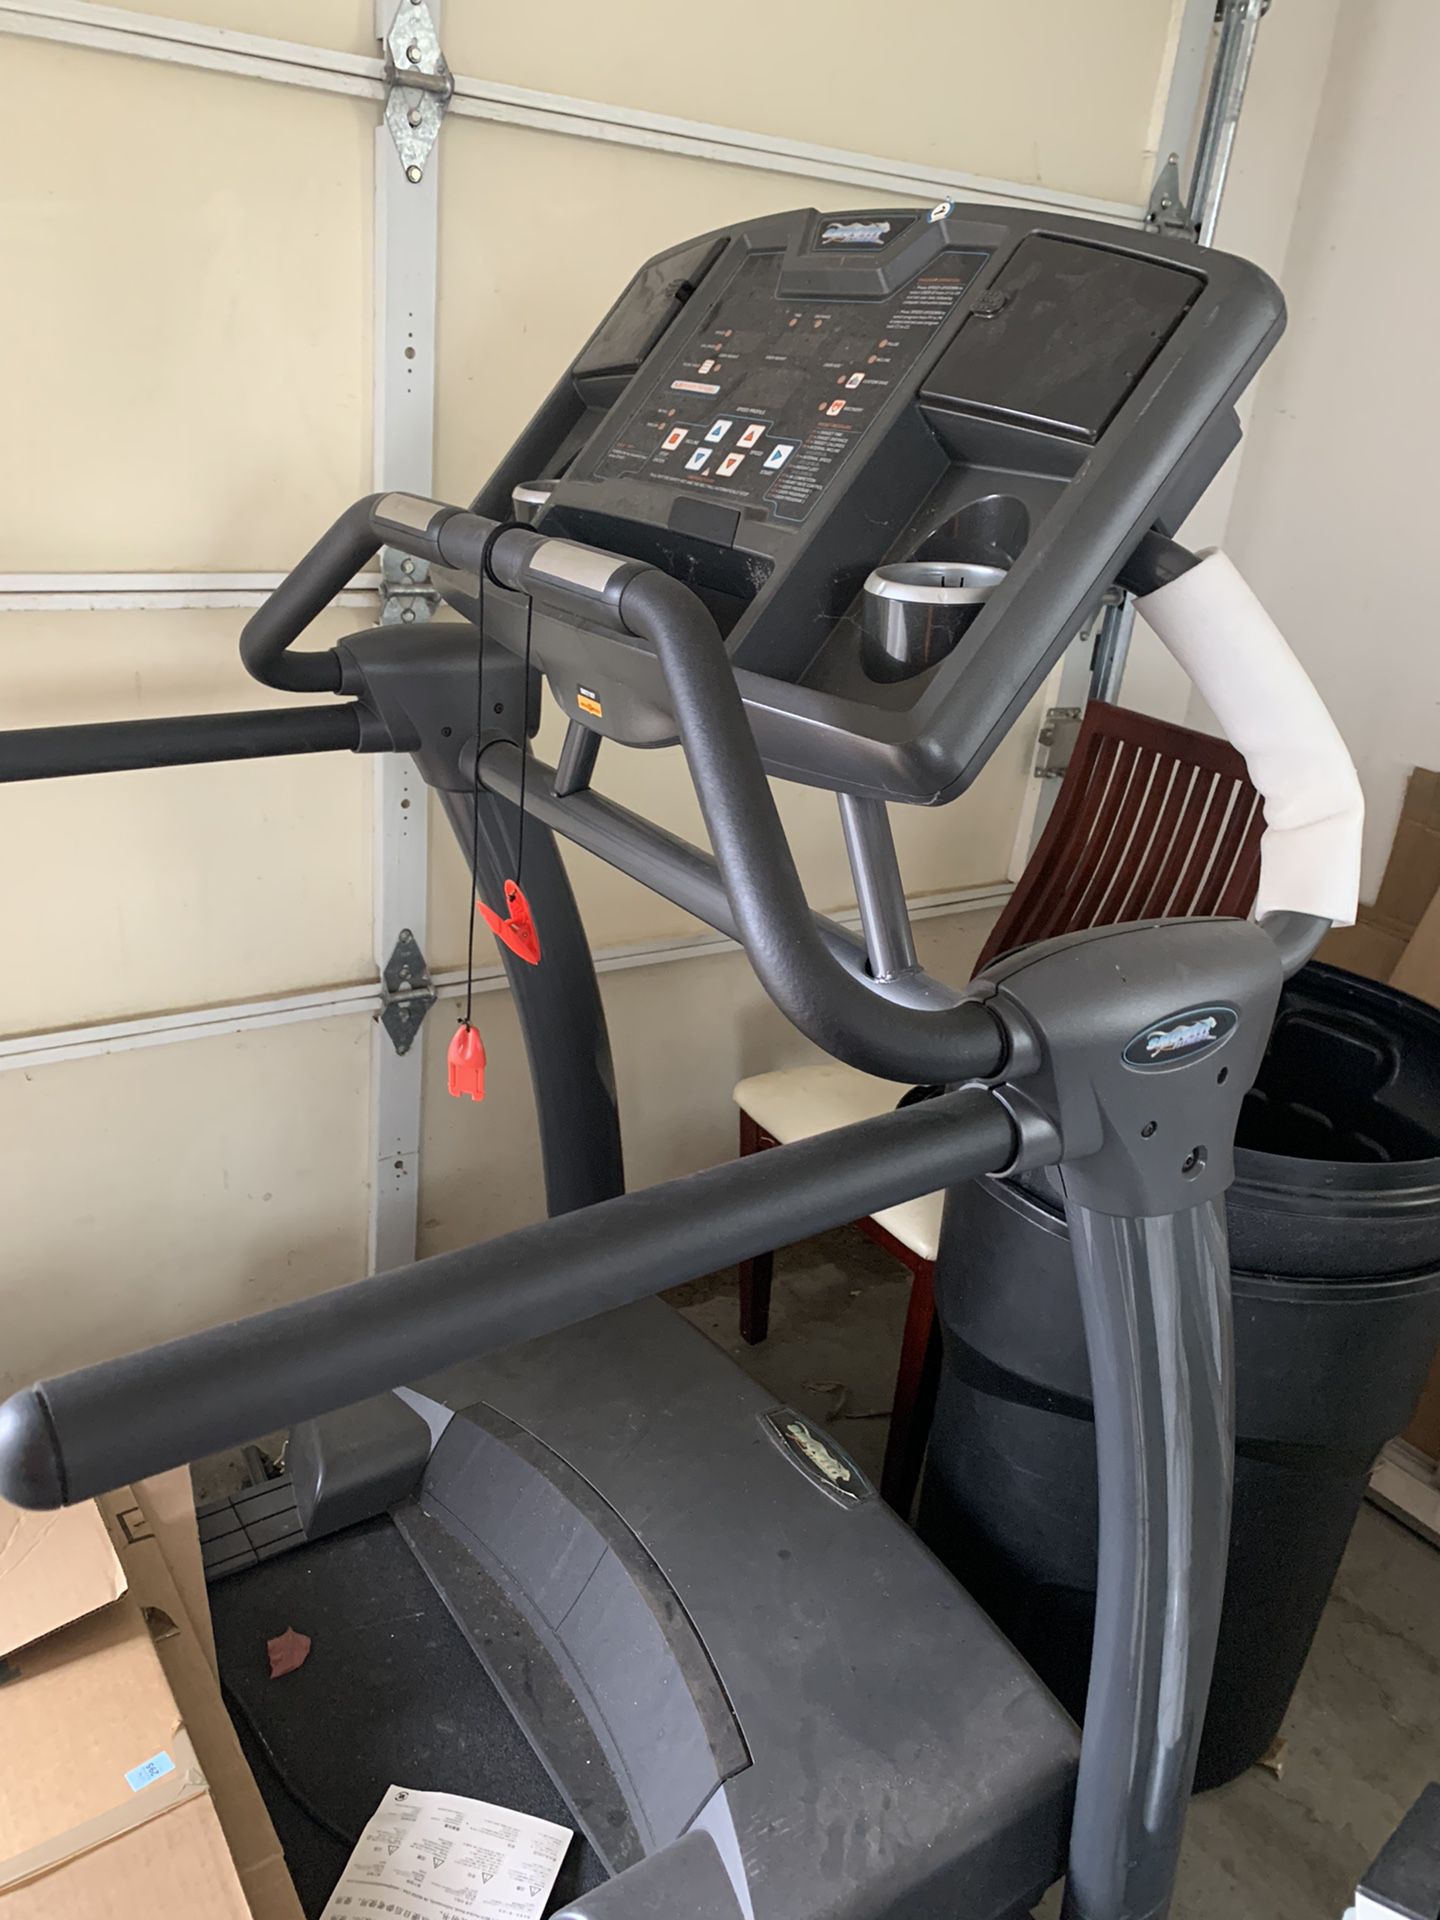 Electric Treadmill Working Condition But Used Long Time Ago